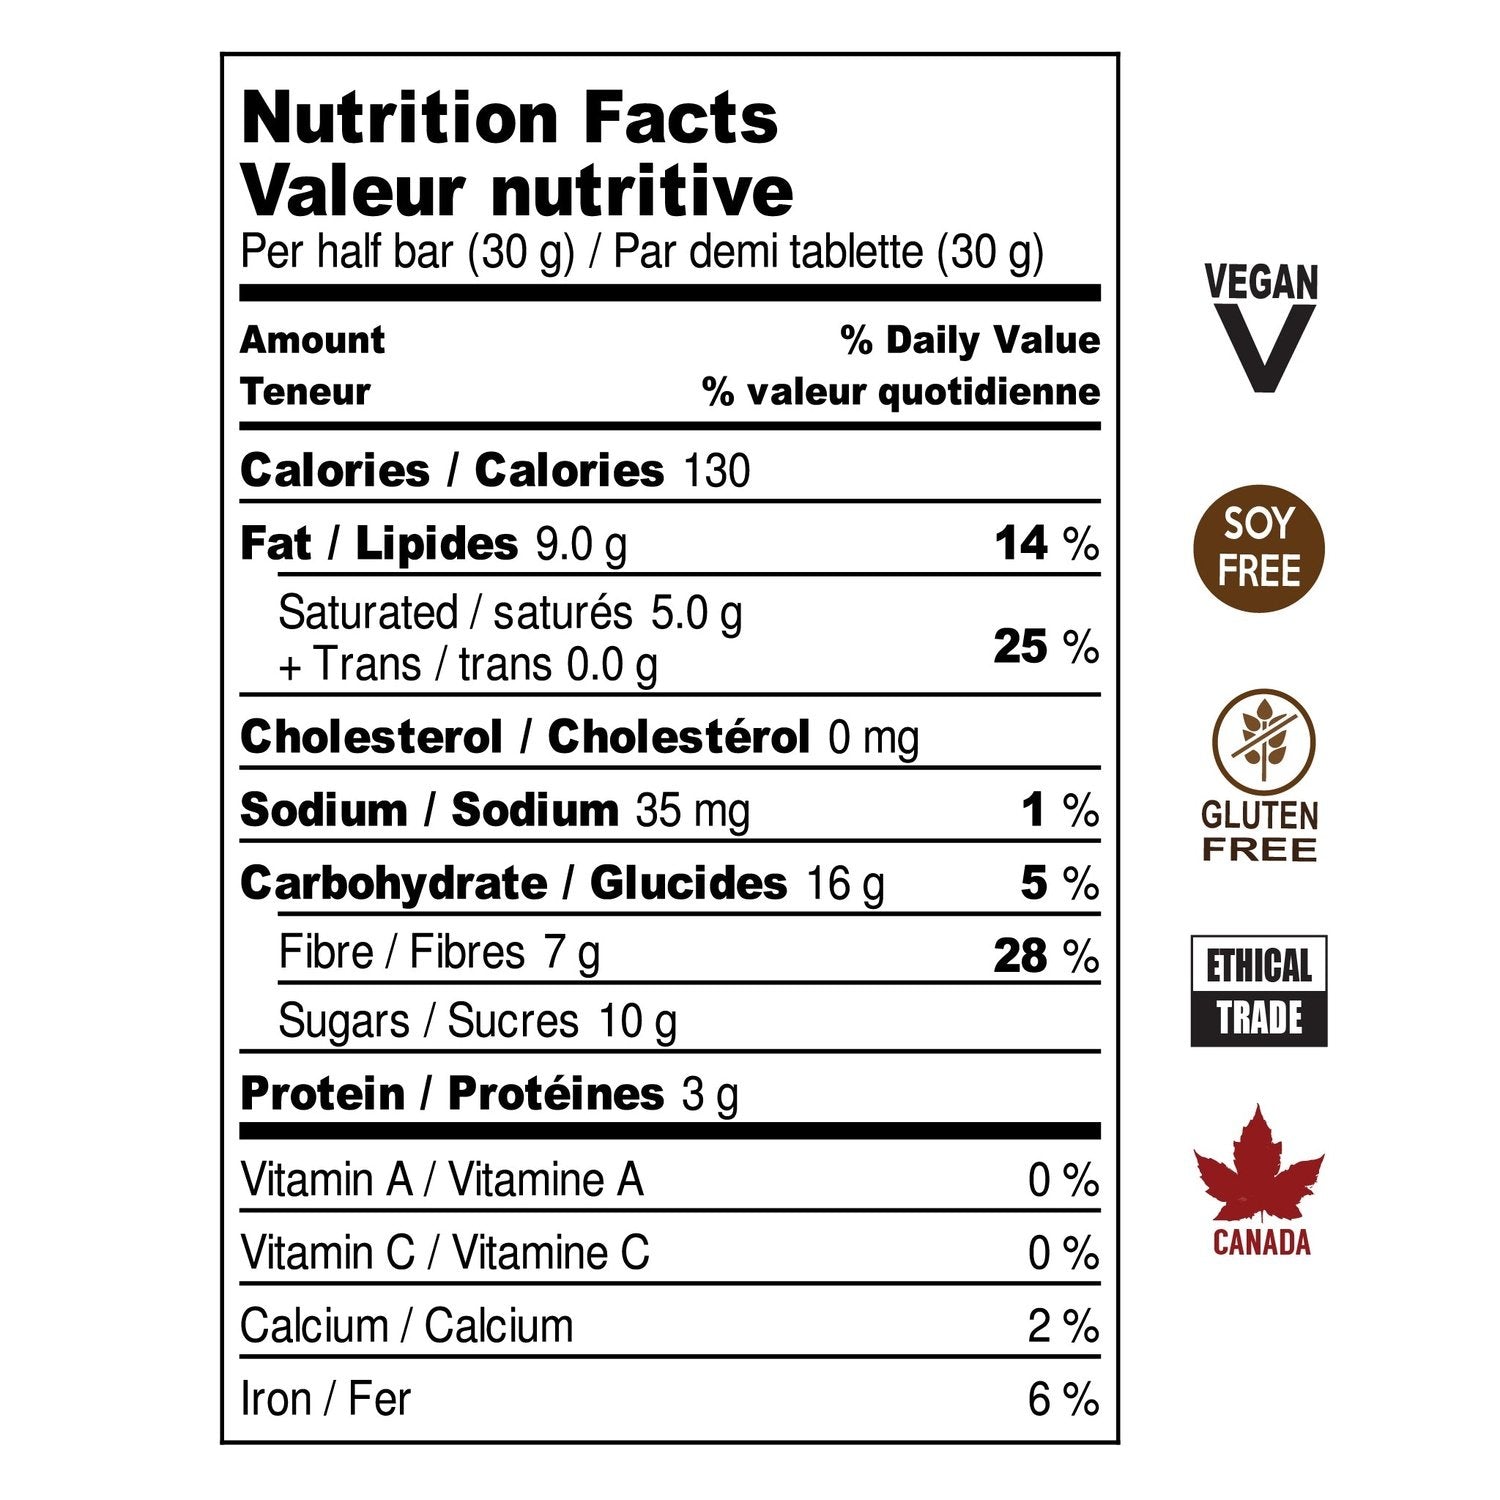 Nutrition Facts for Fleur de Sel chocolate bar. Vegan chocolate, soy free chocolate, gluten free chocolate, ethical trade and made in Canada